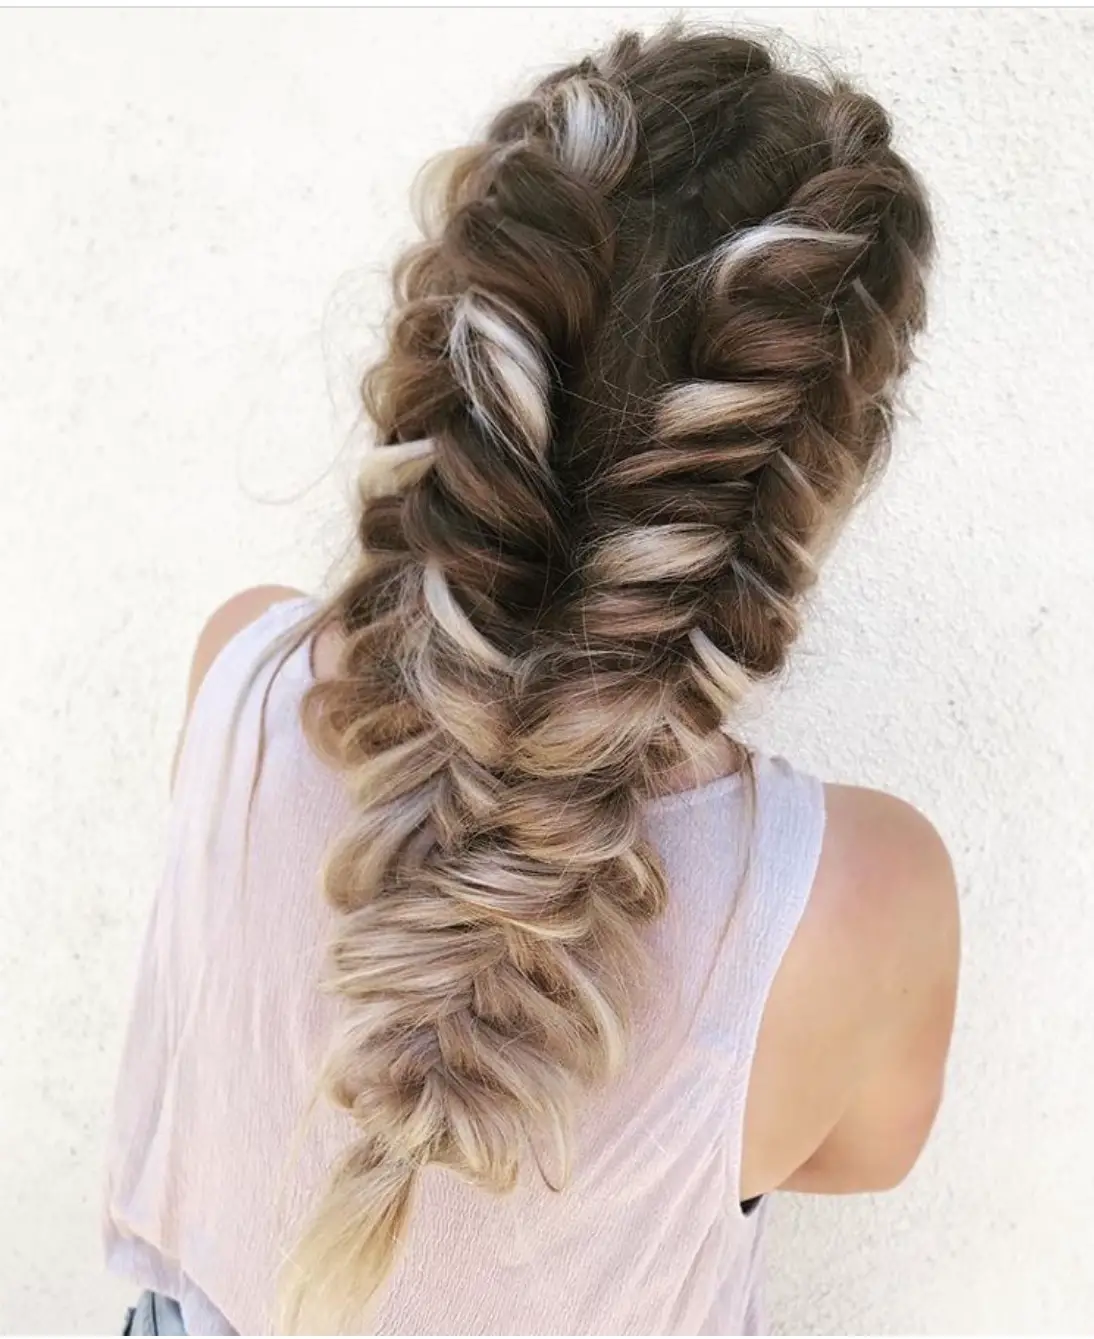 16 Simple Hair Braid Styles To Try - The Wonder Cottage